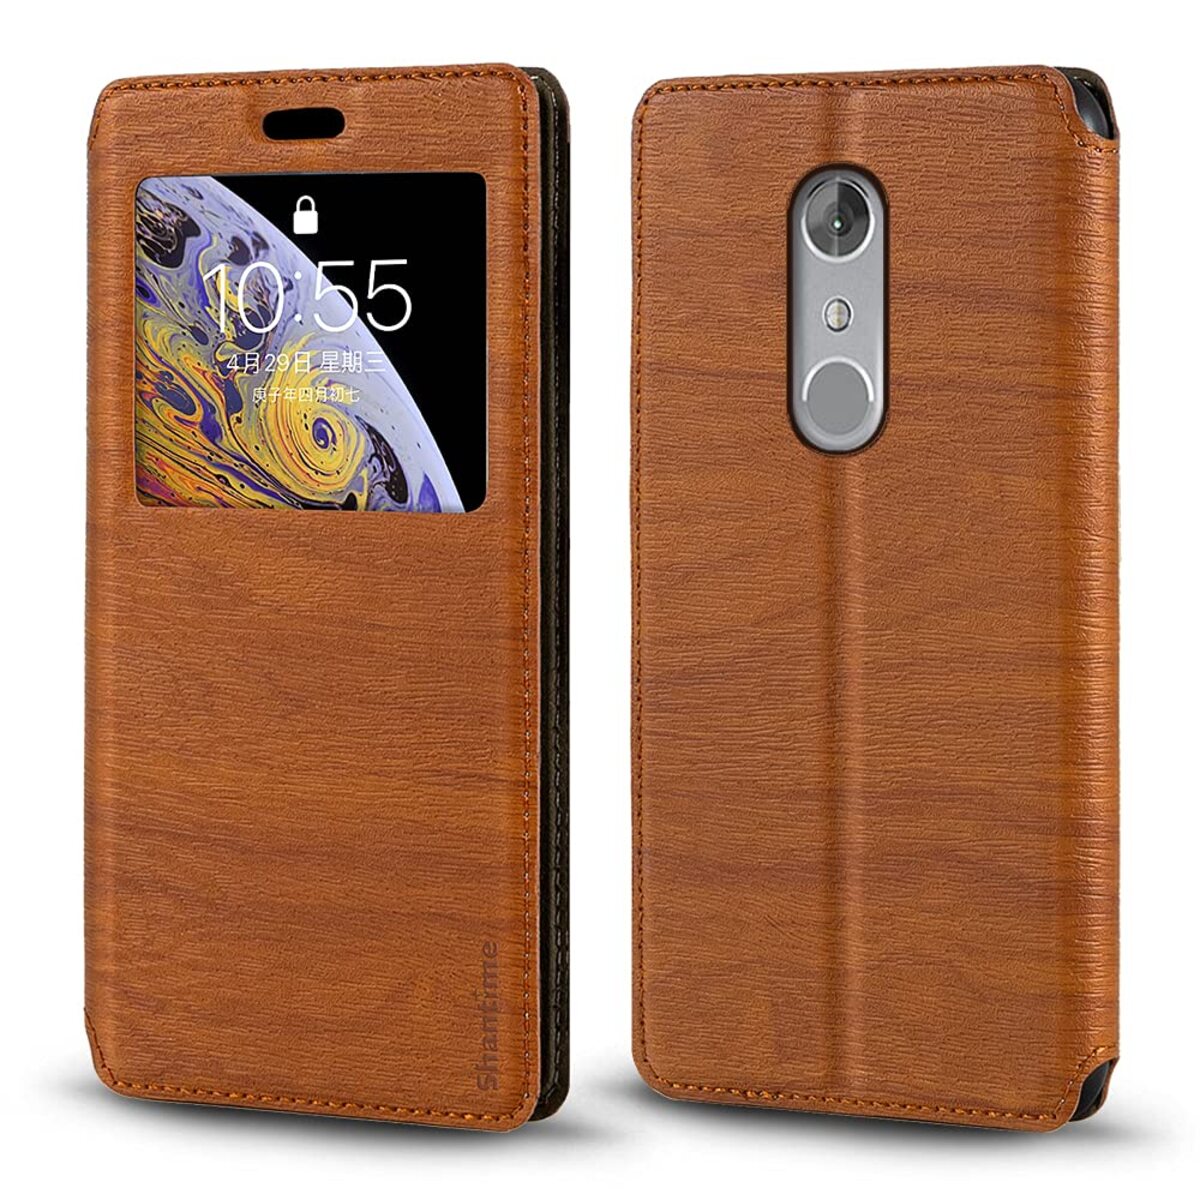 the-10-best-zte-axon-7-cases-and-covers